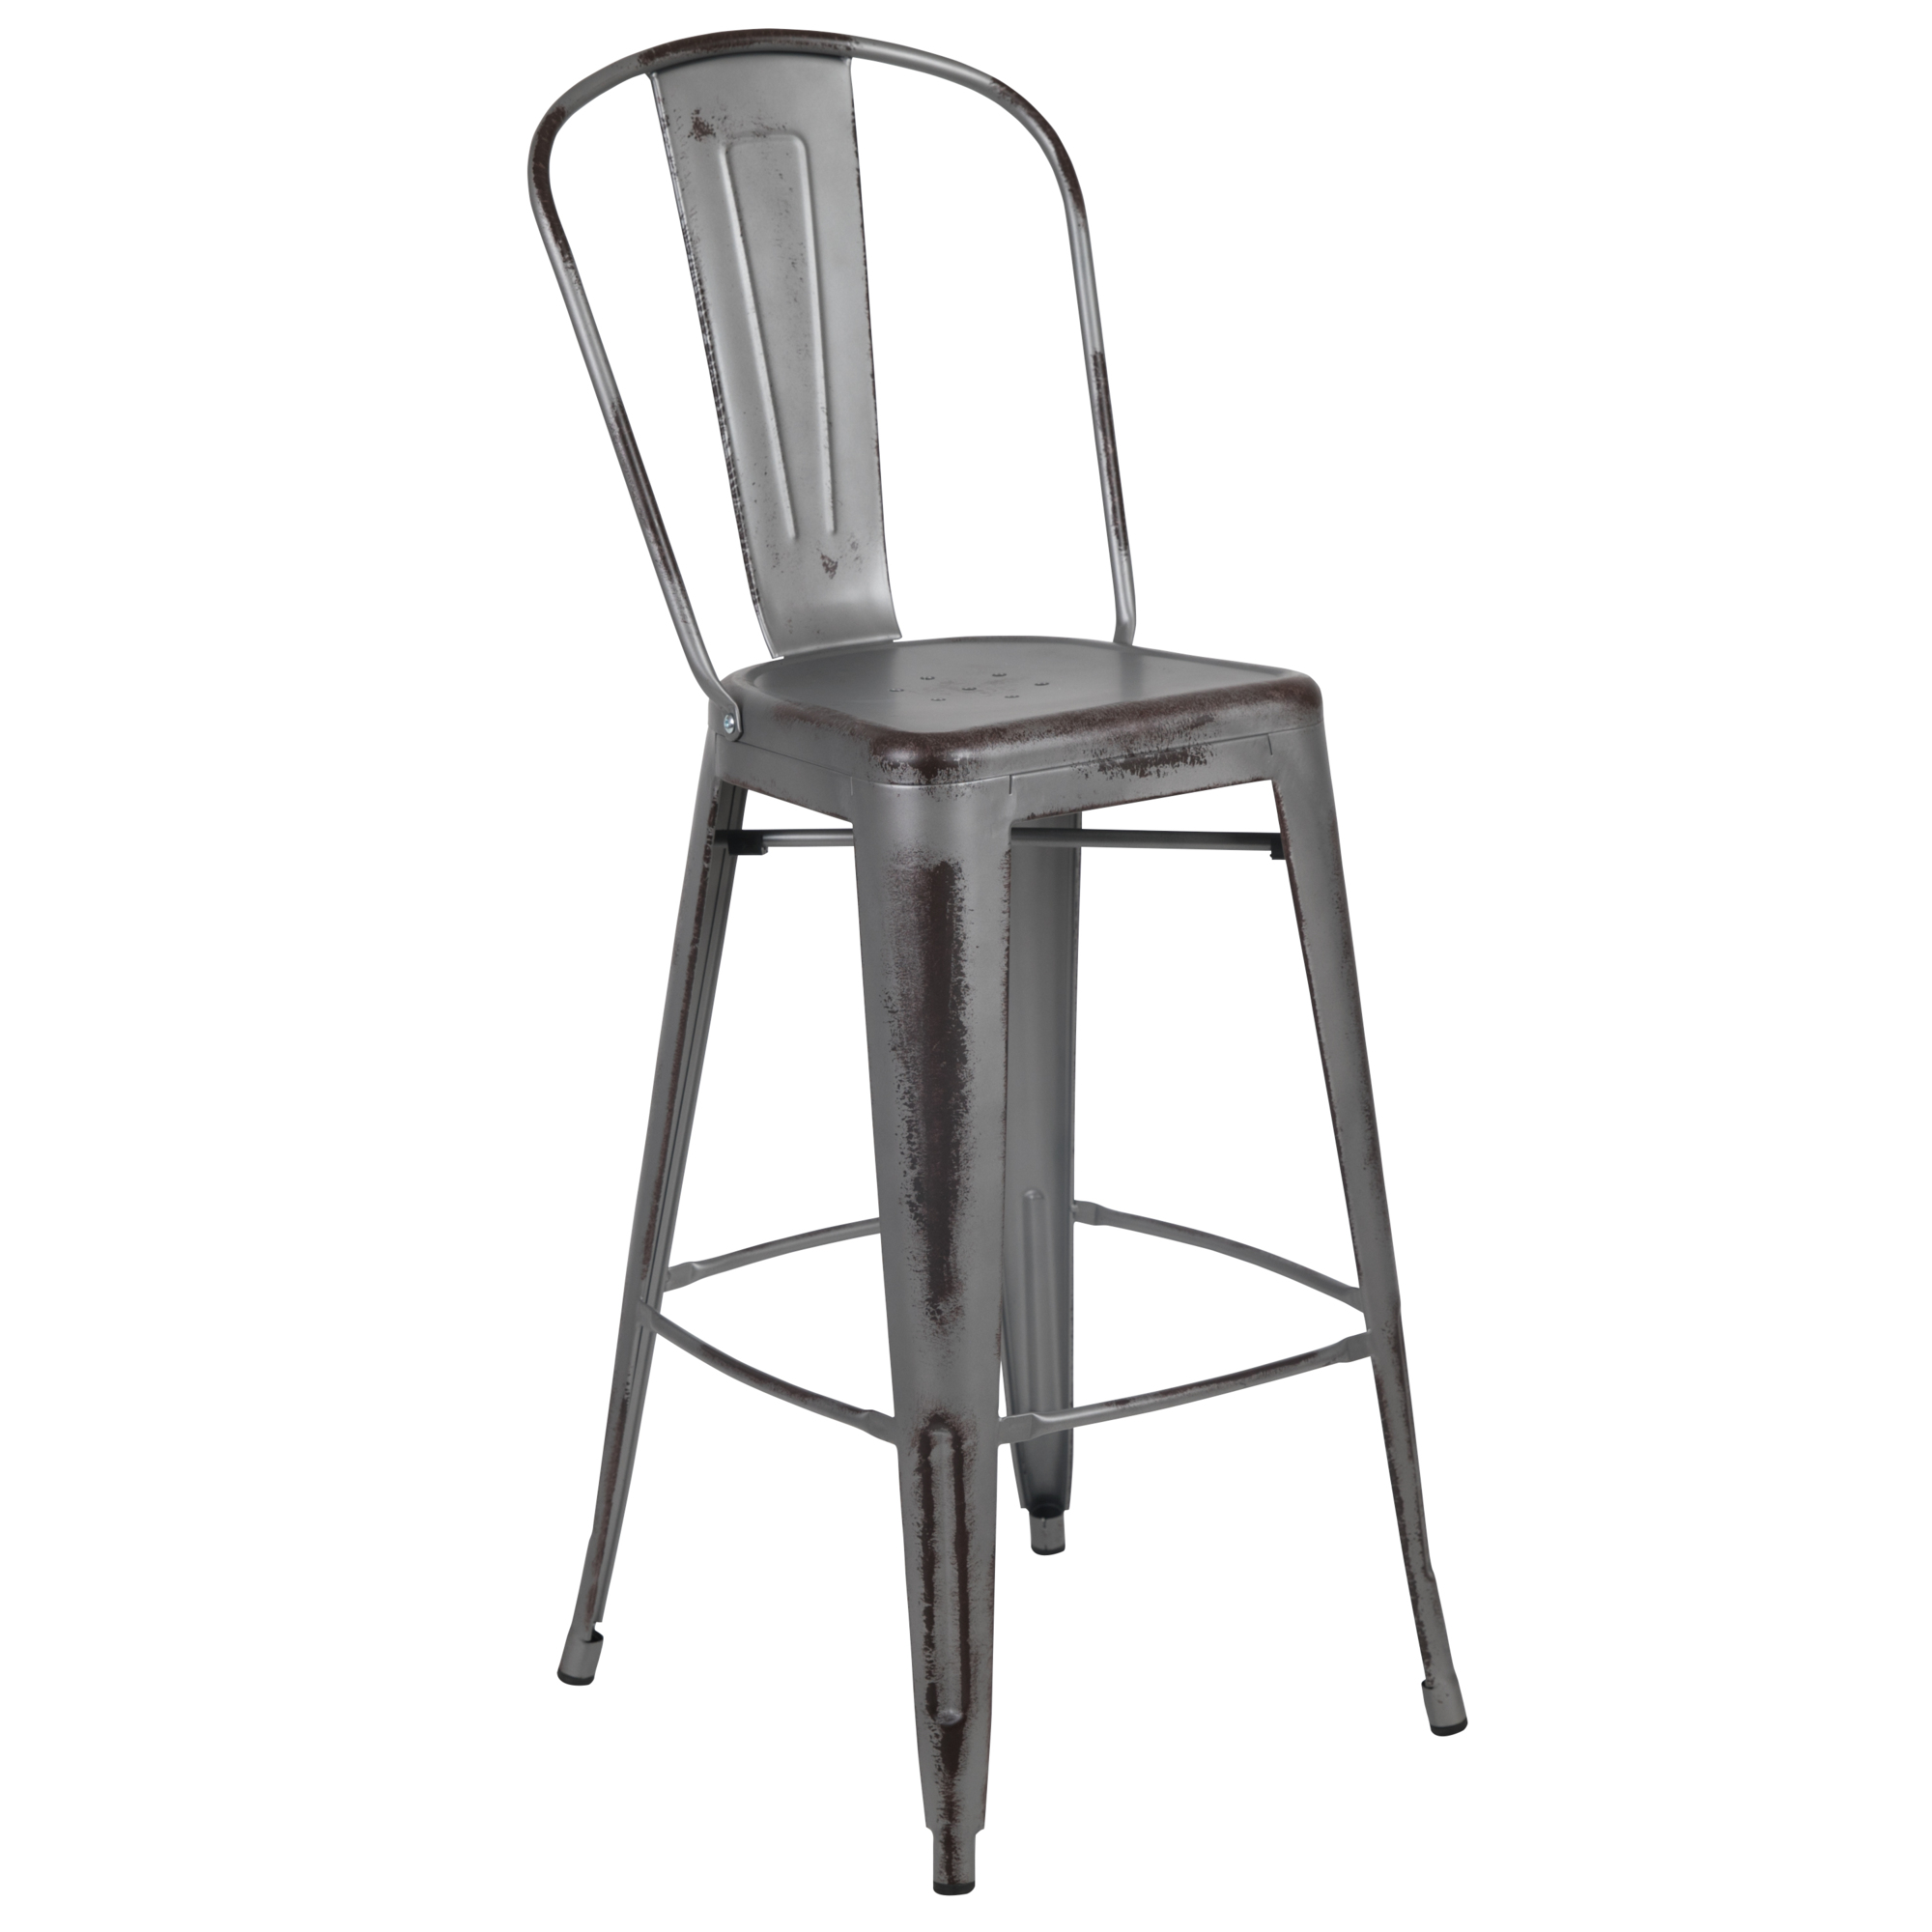 Flash Furniture, 30Inch H Distressed Silver Indoor-Outdoor Counterstool, Primary Color Gray, Included (qty.) 1, Model ET353430SIL